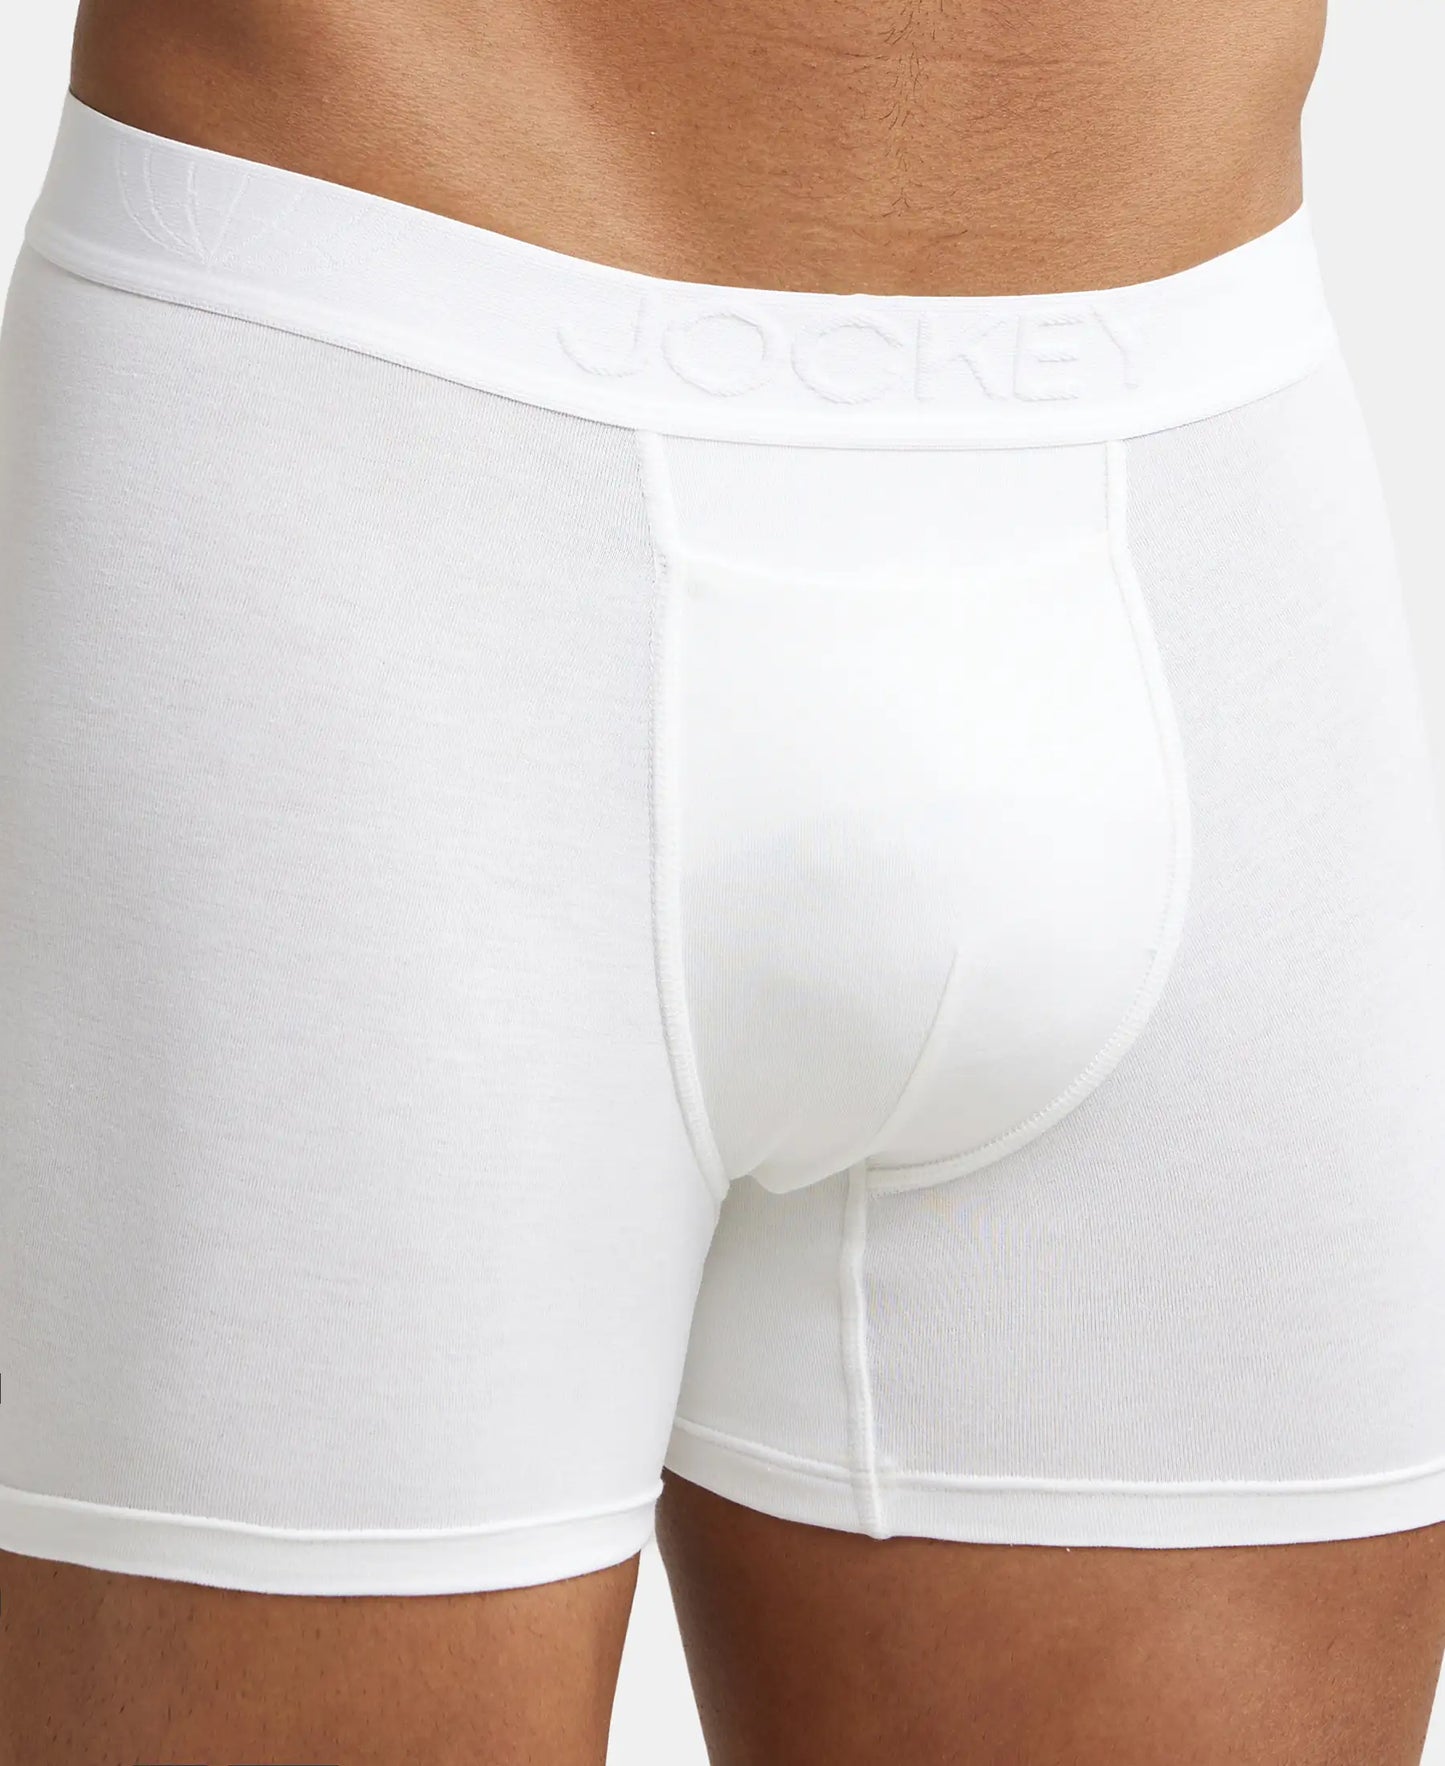 Tencel Micro Modal Cotton Elastane Stretch Solid Boxer Brief with Internal Breathable Mesh - White-7